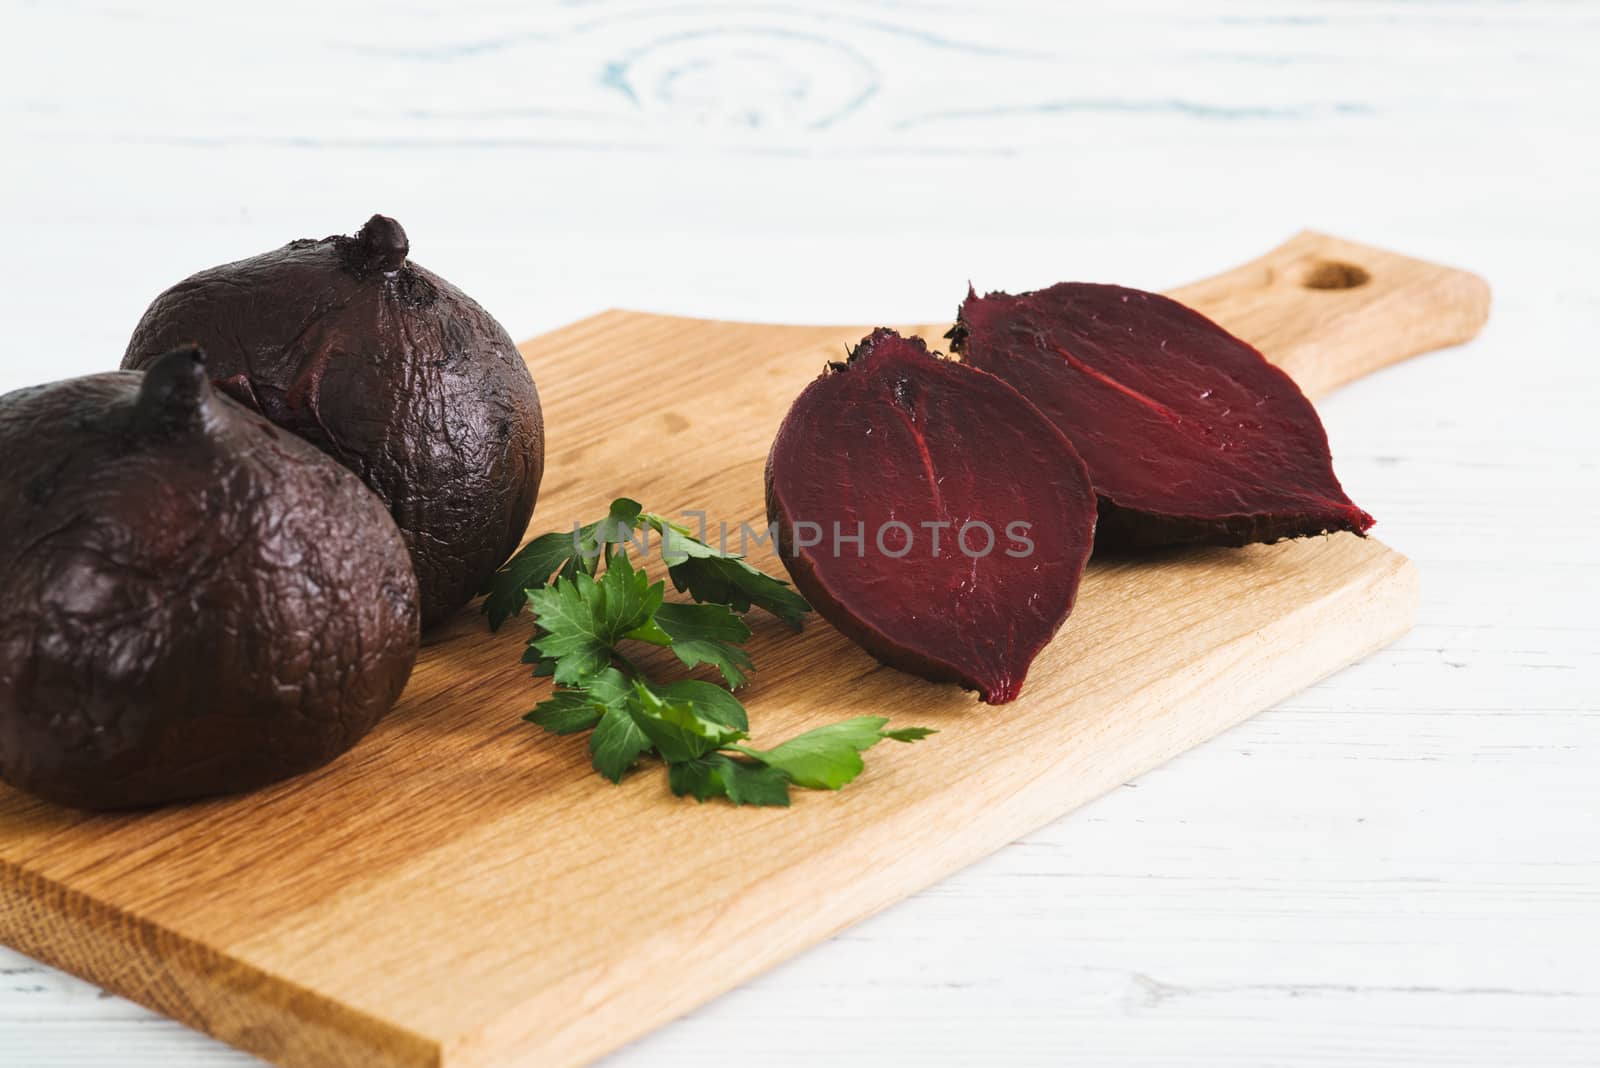 Boiled beets on board, light wooden background